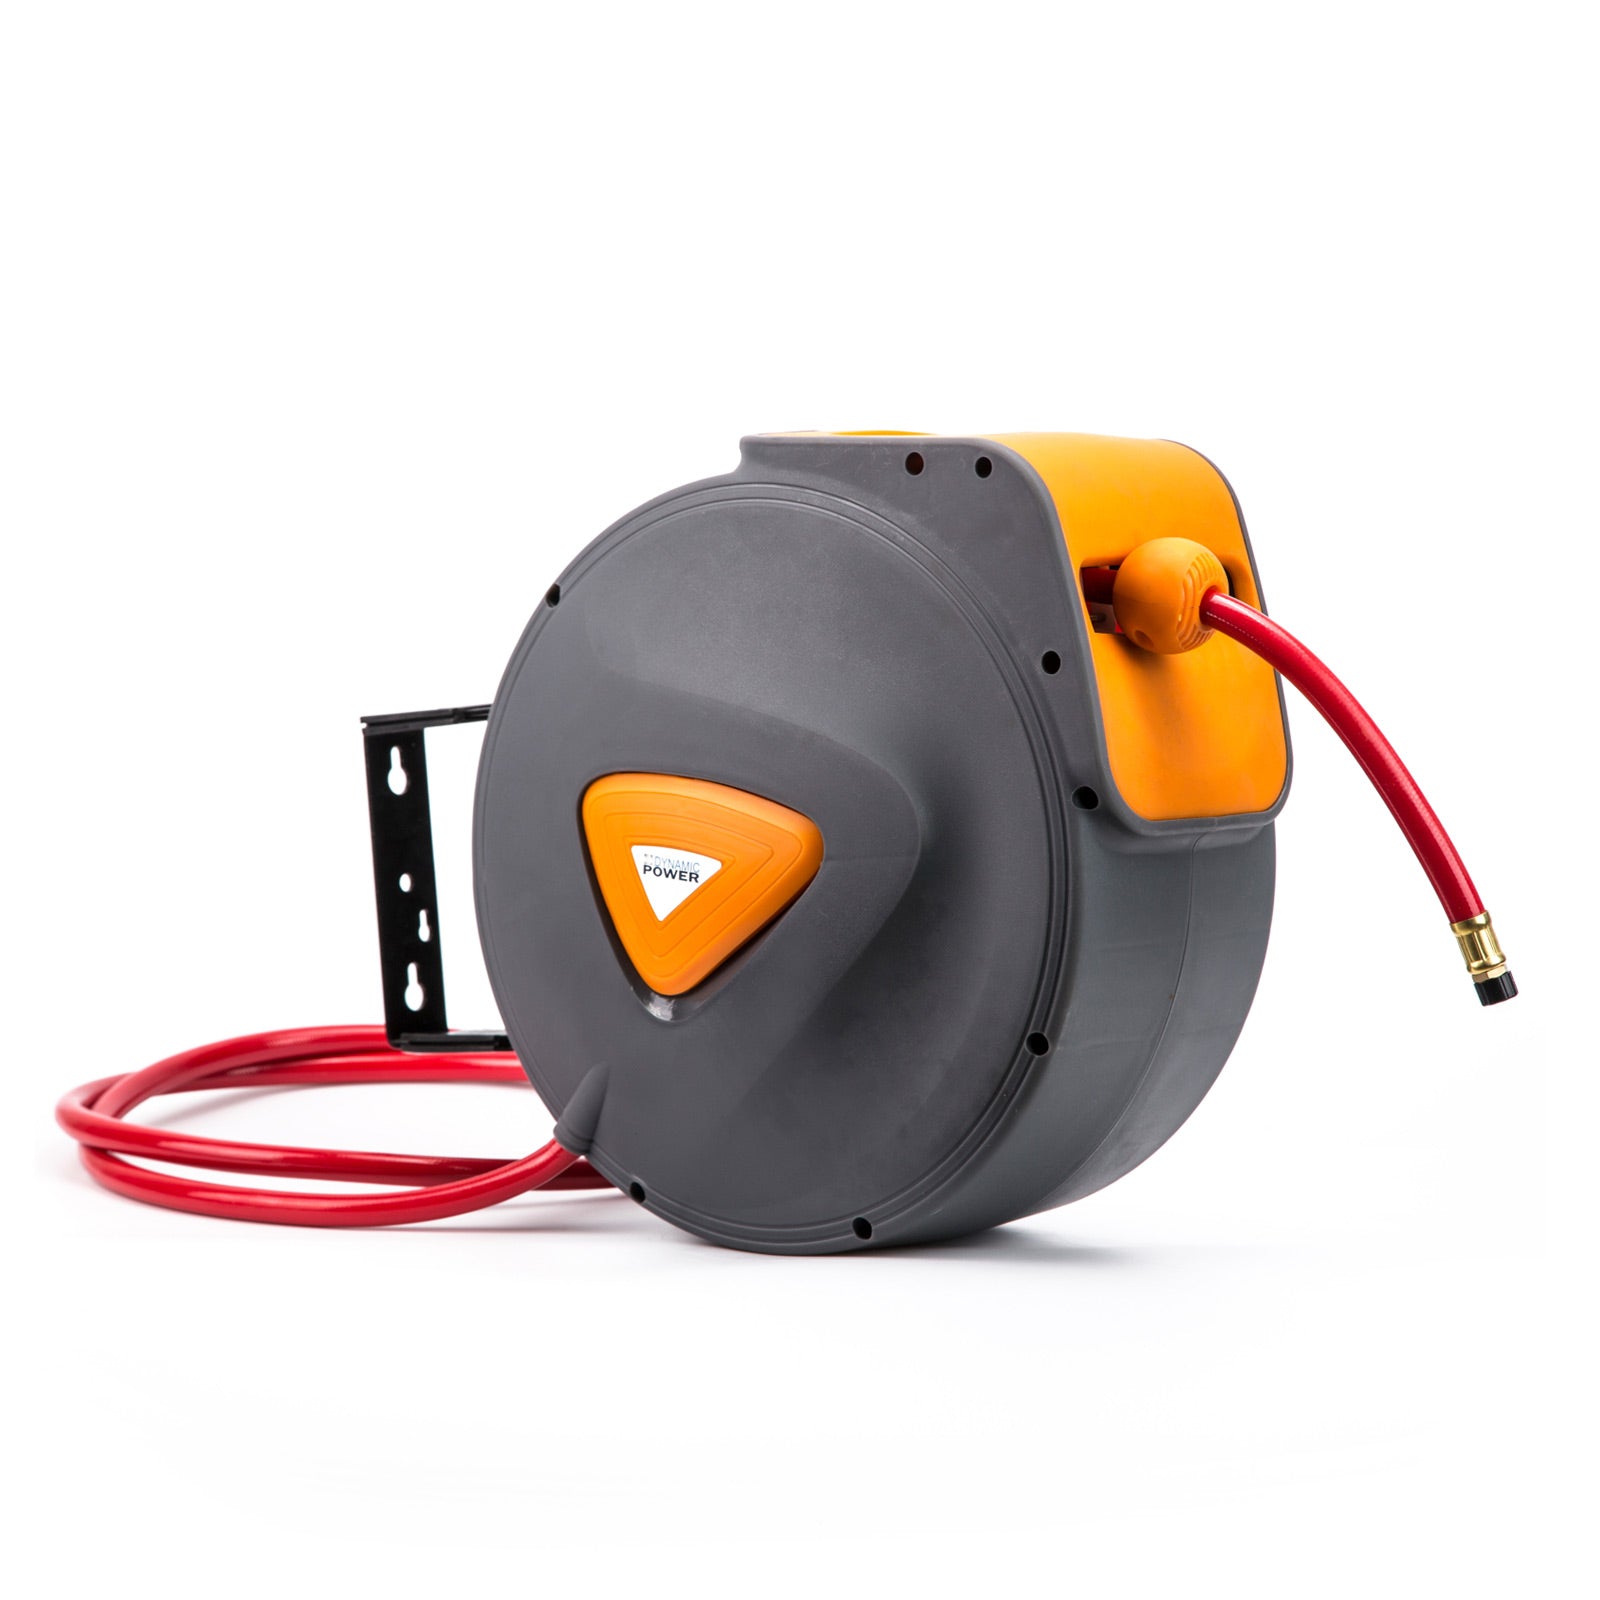 20M Retractable Air Hose Reel Commercial Auto Rewind Wall Mounted